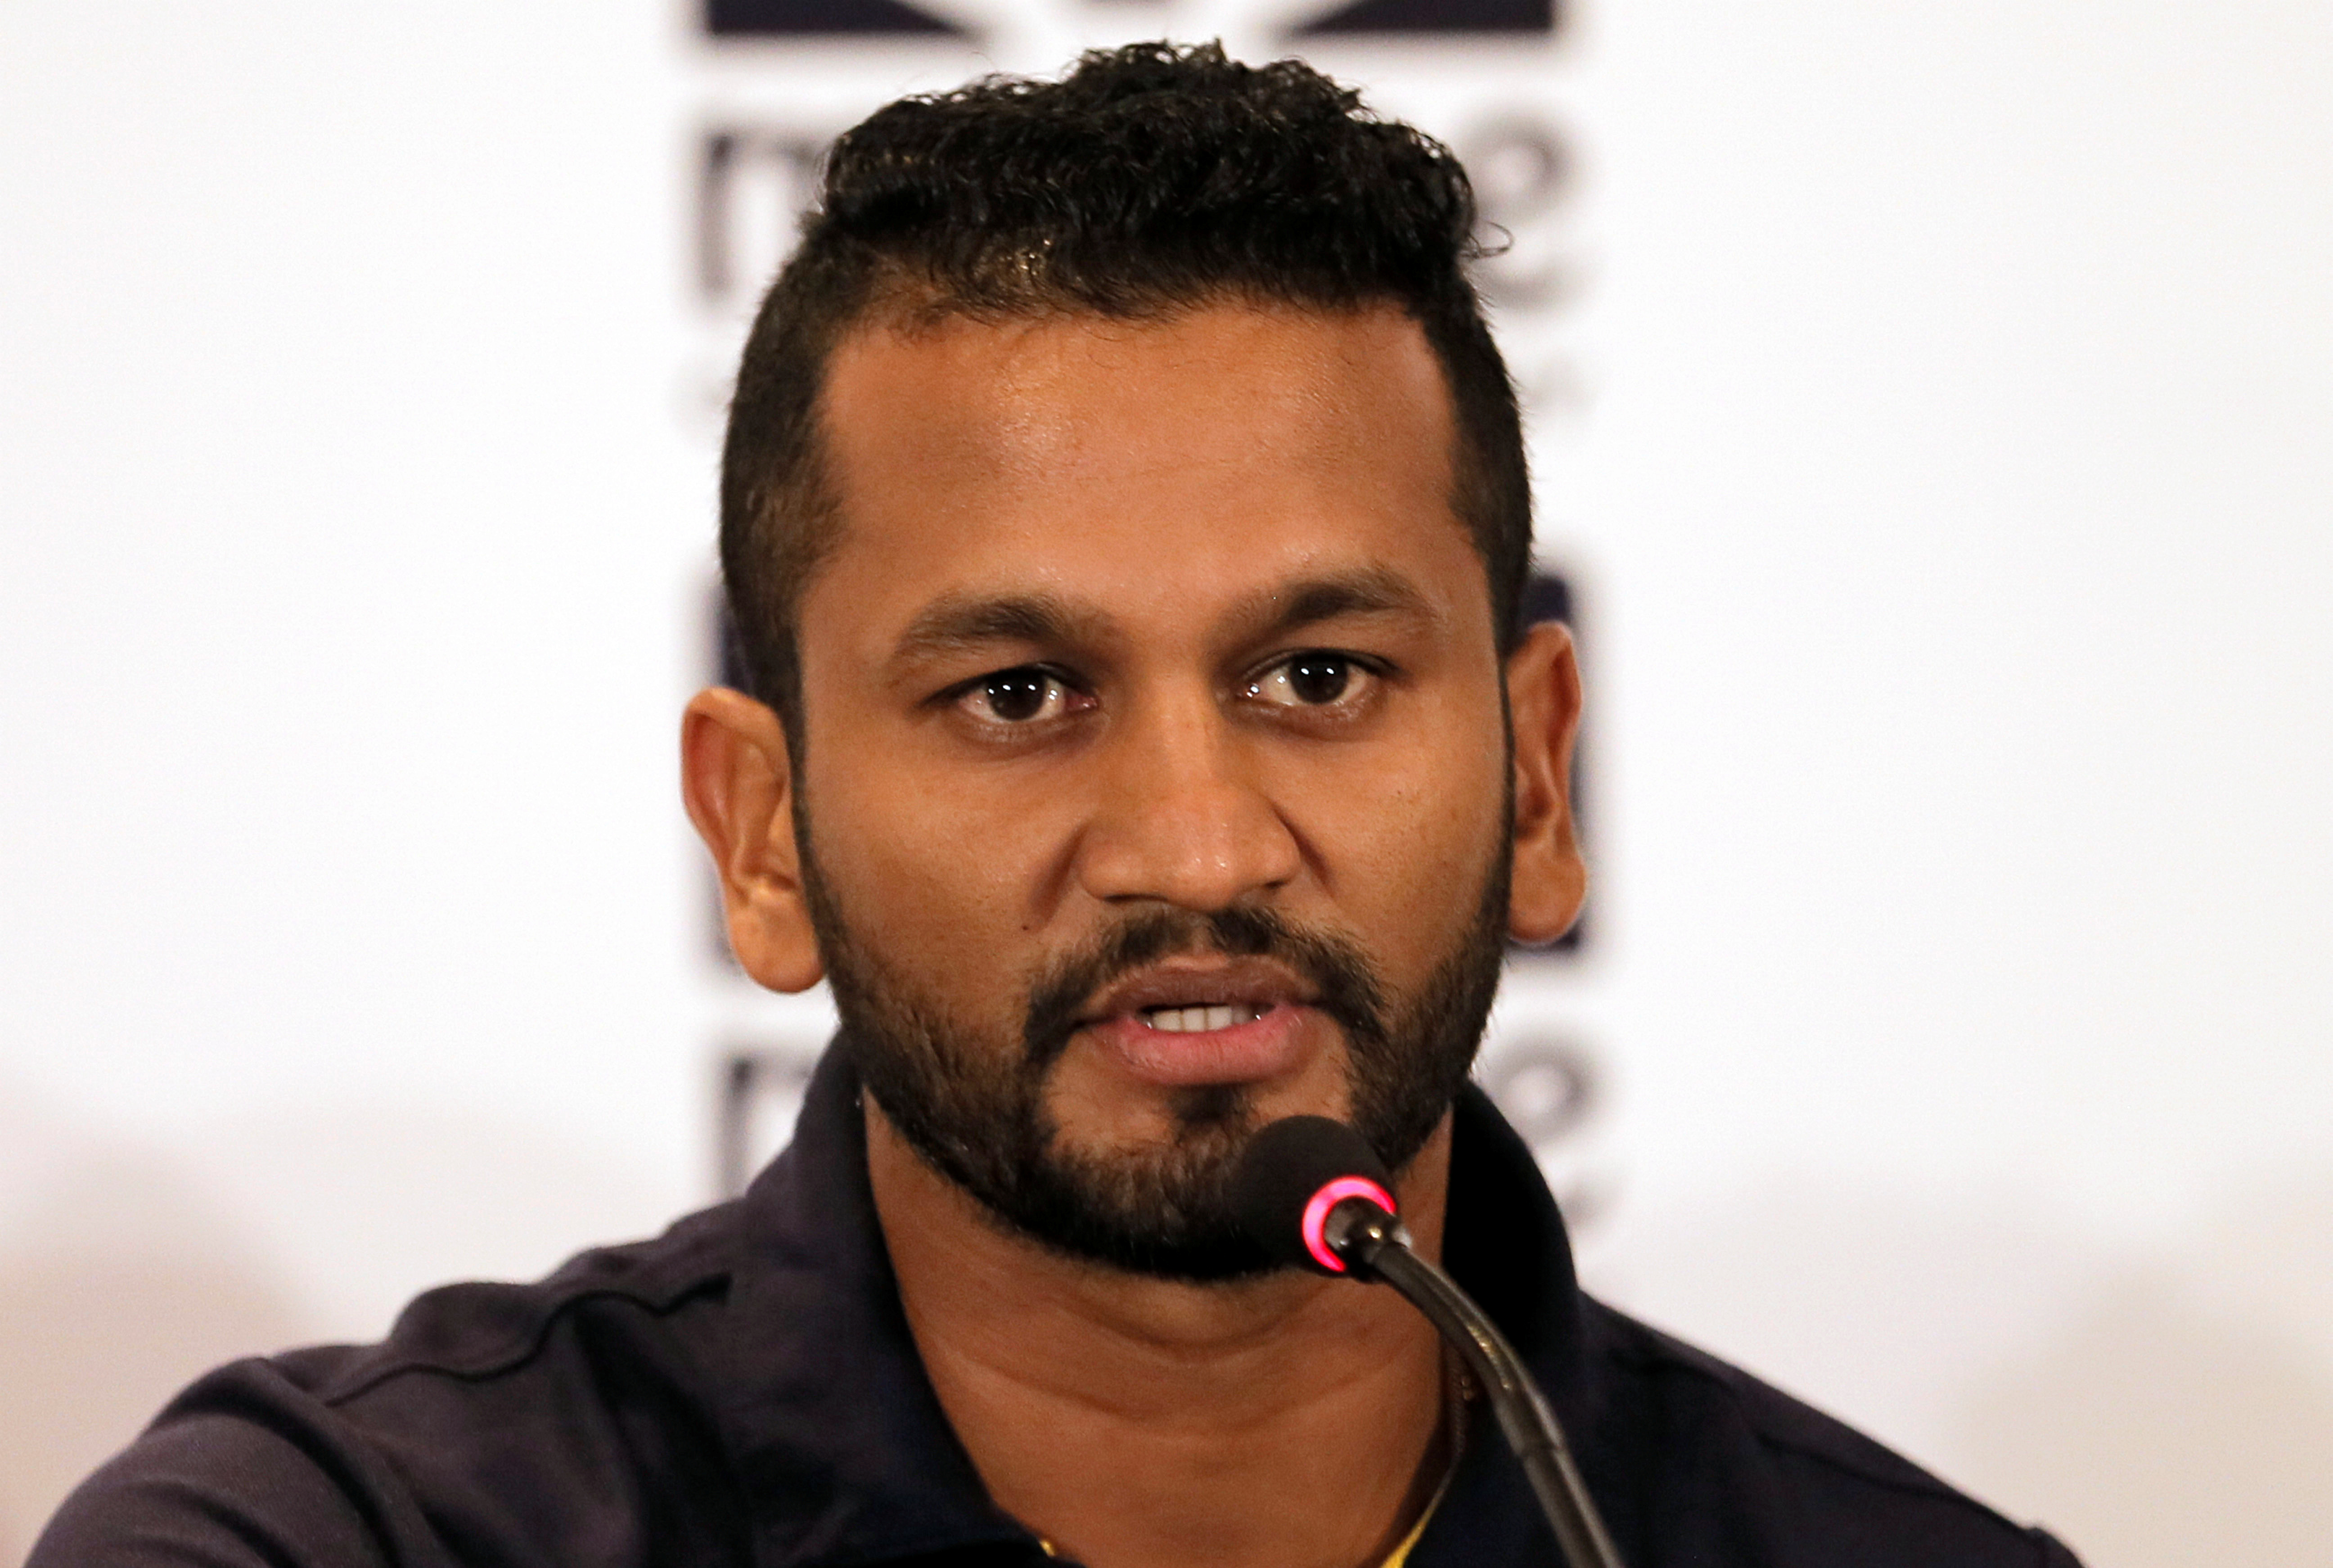 Sri Lanka cricket captain Dimuth Karunaratne speaks during a news conference ahead of the two test cricket matches against England for the ICC World Test Championship in Colombo